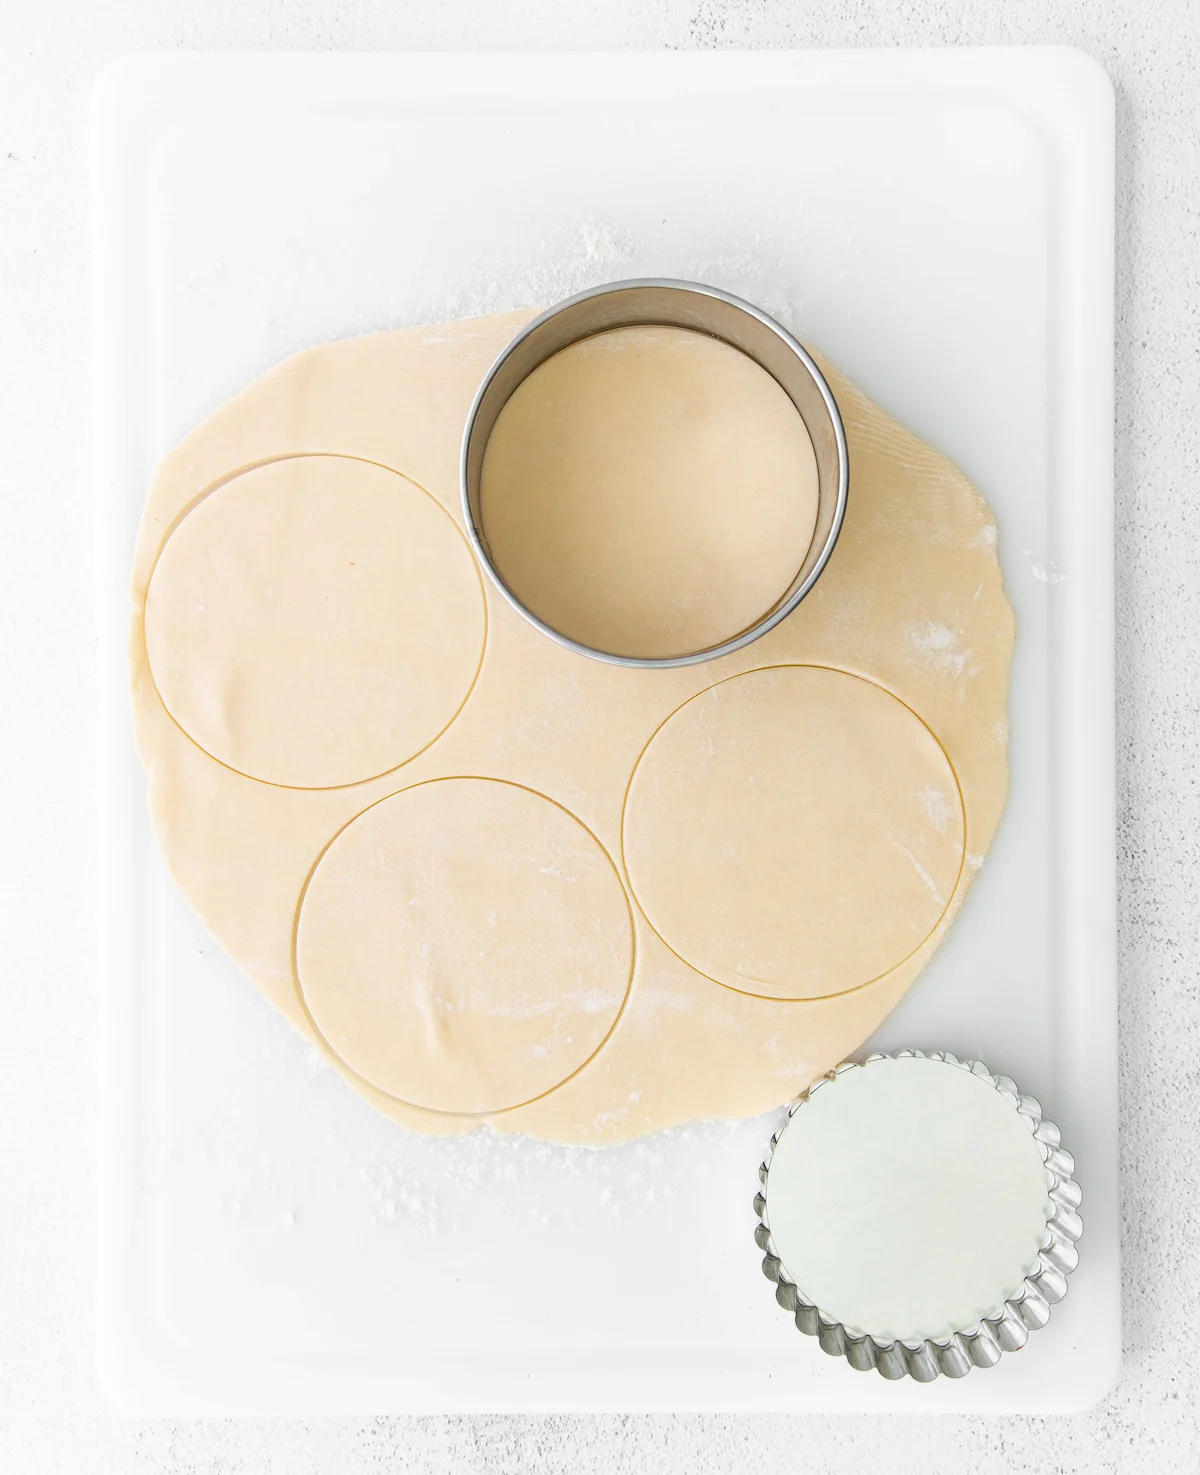 Cutting circles out of pie crust with a cookie cutter